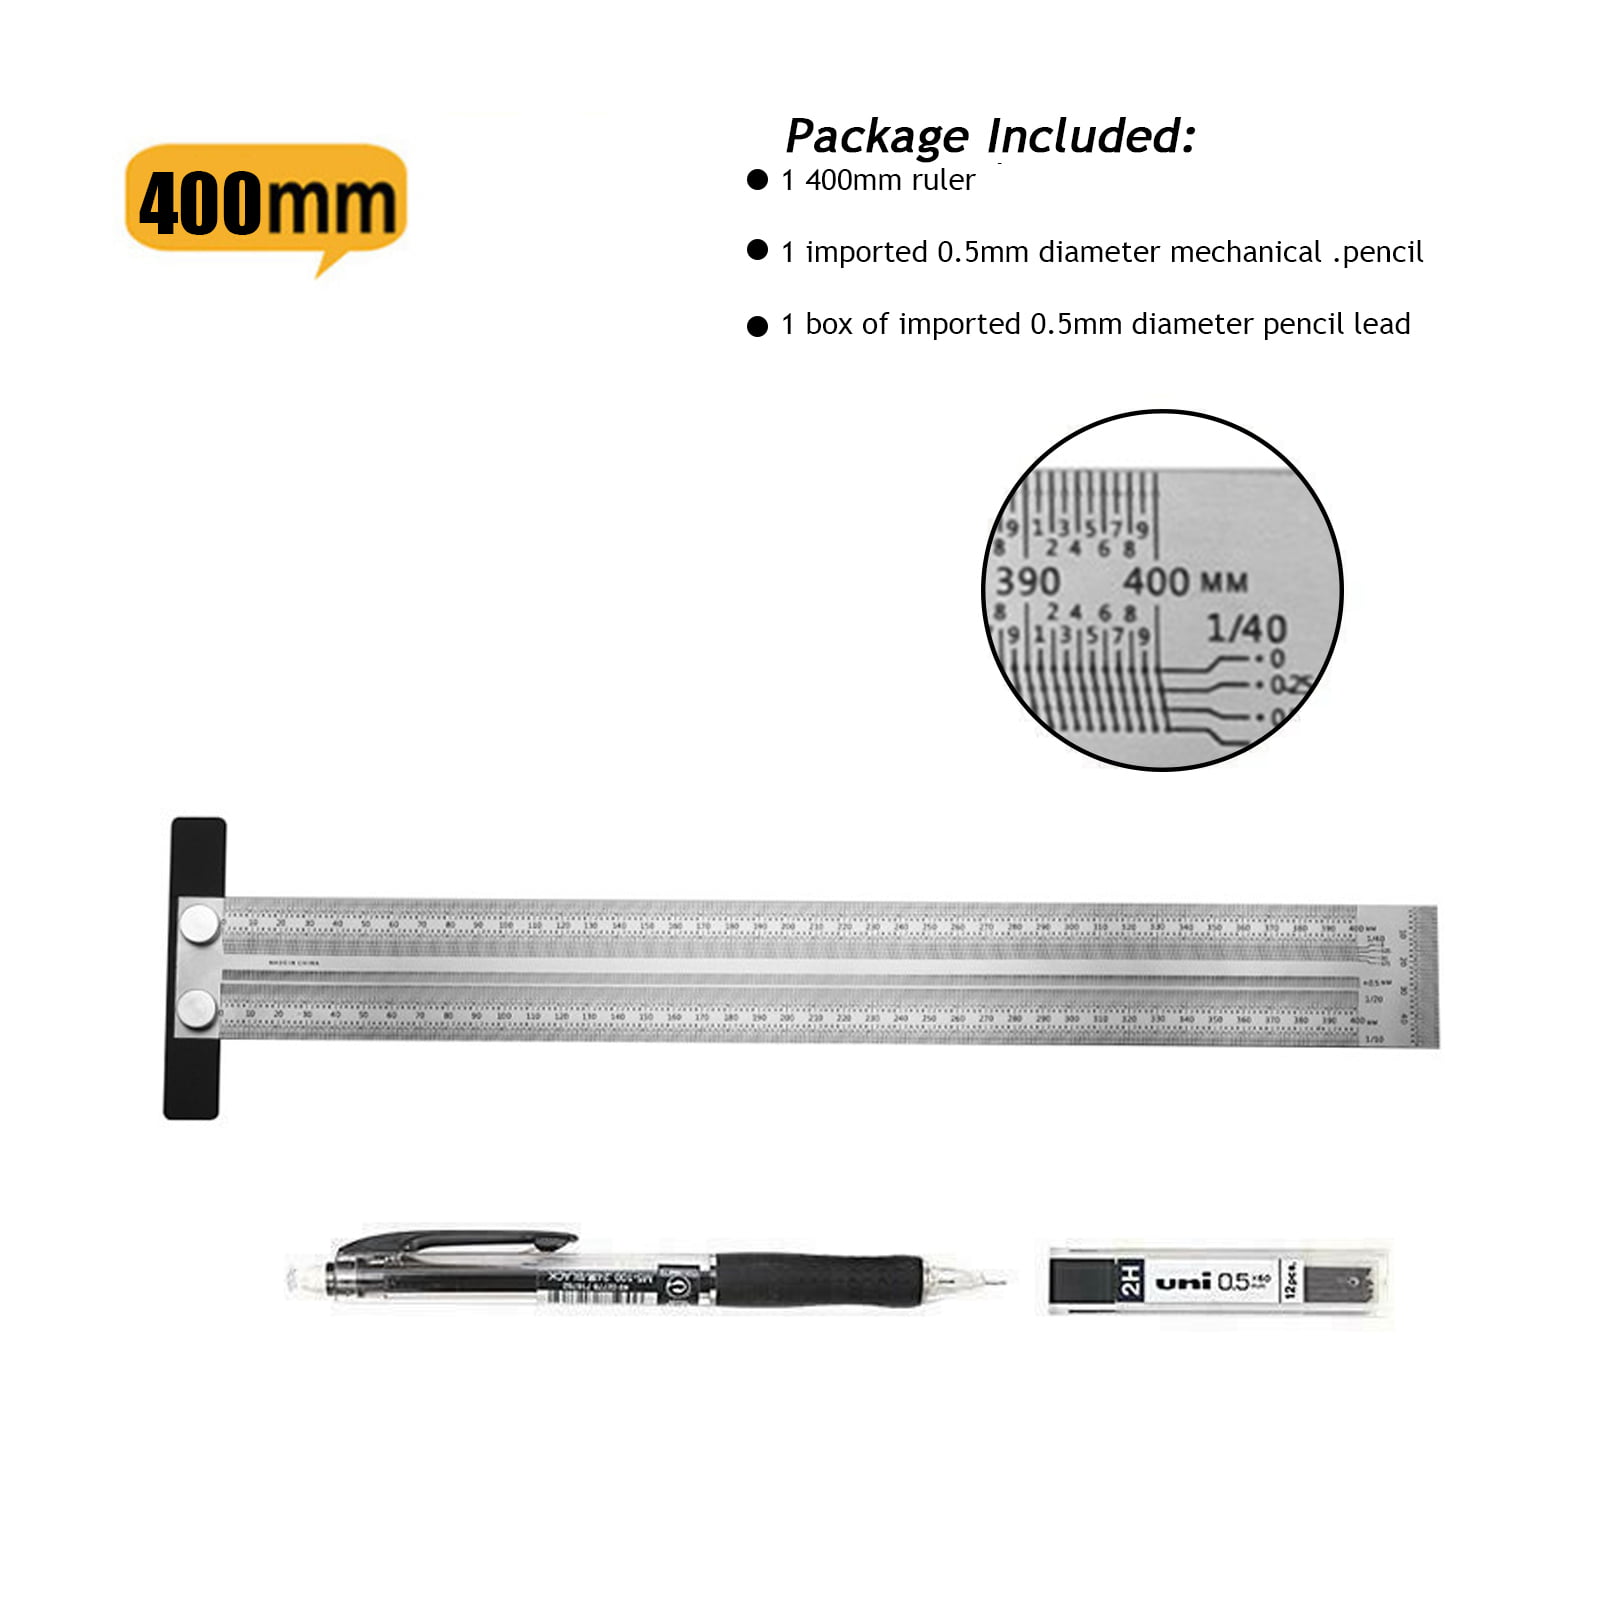 200mm Ultra Precision Marking Ruler Scale Set T-type Hole Metal Stainless Steel 